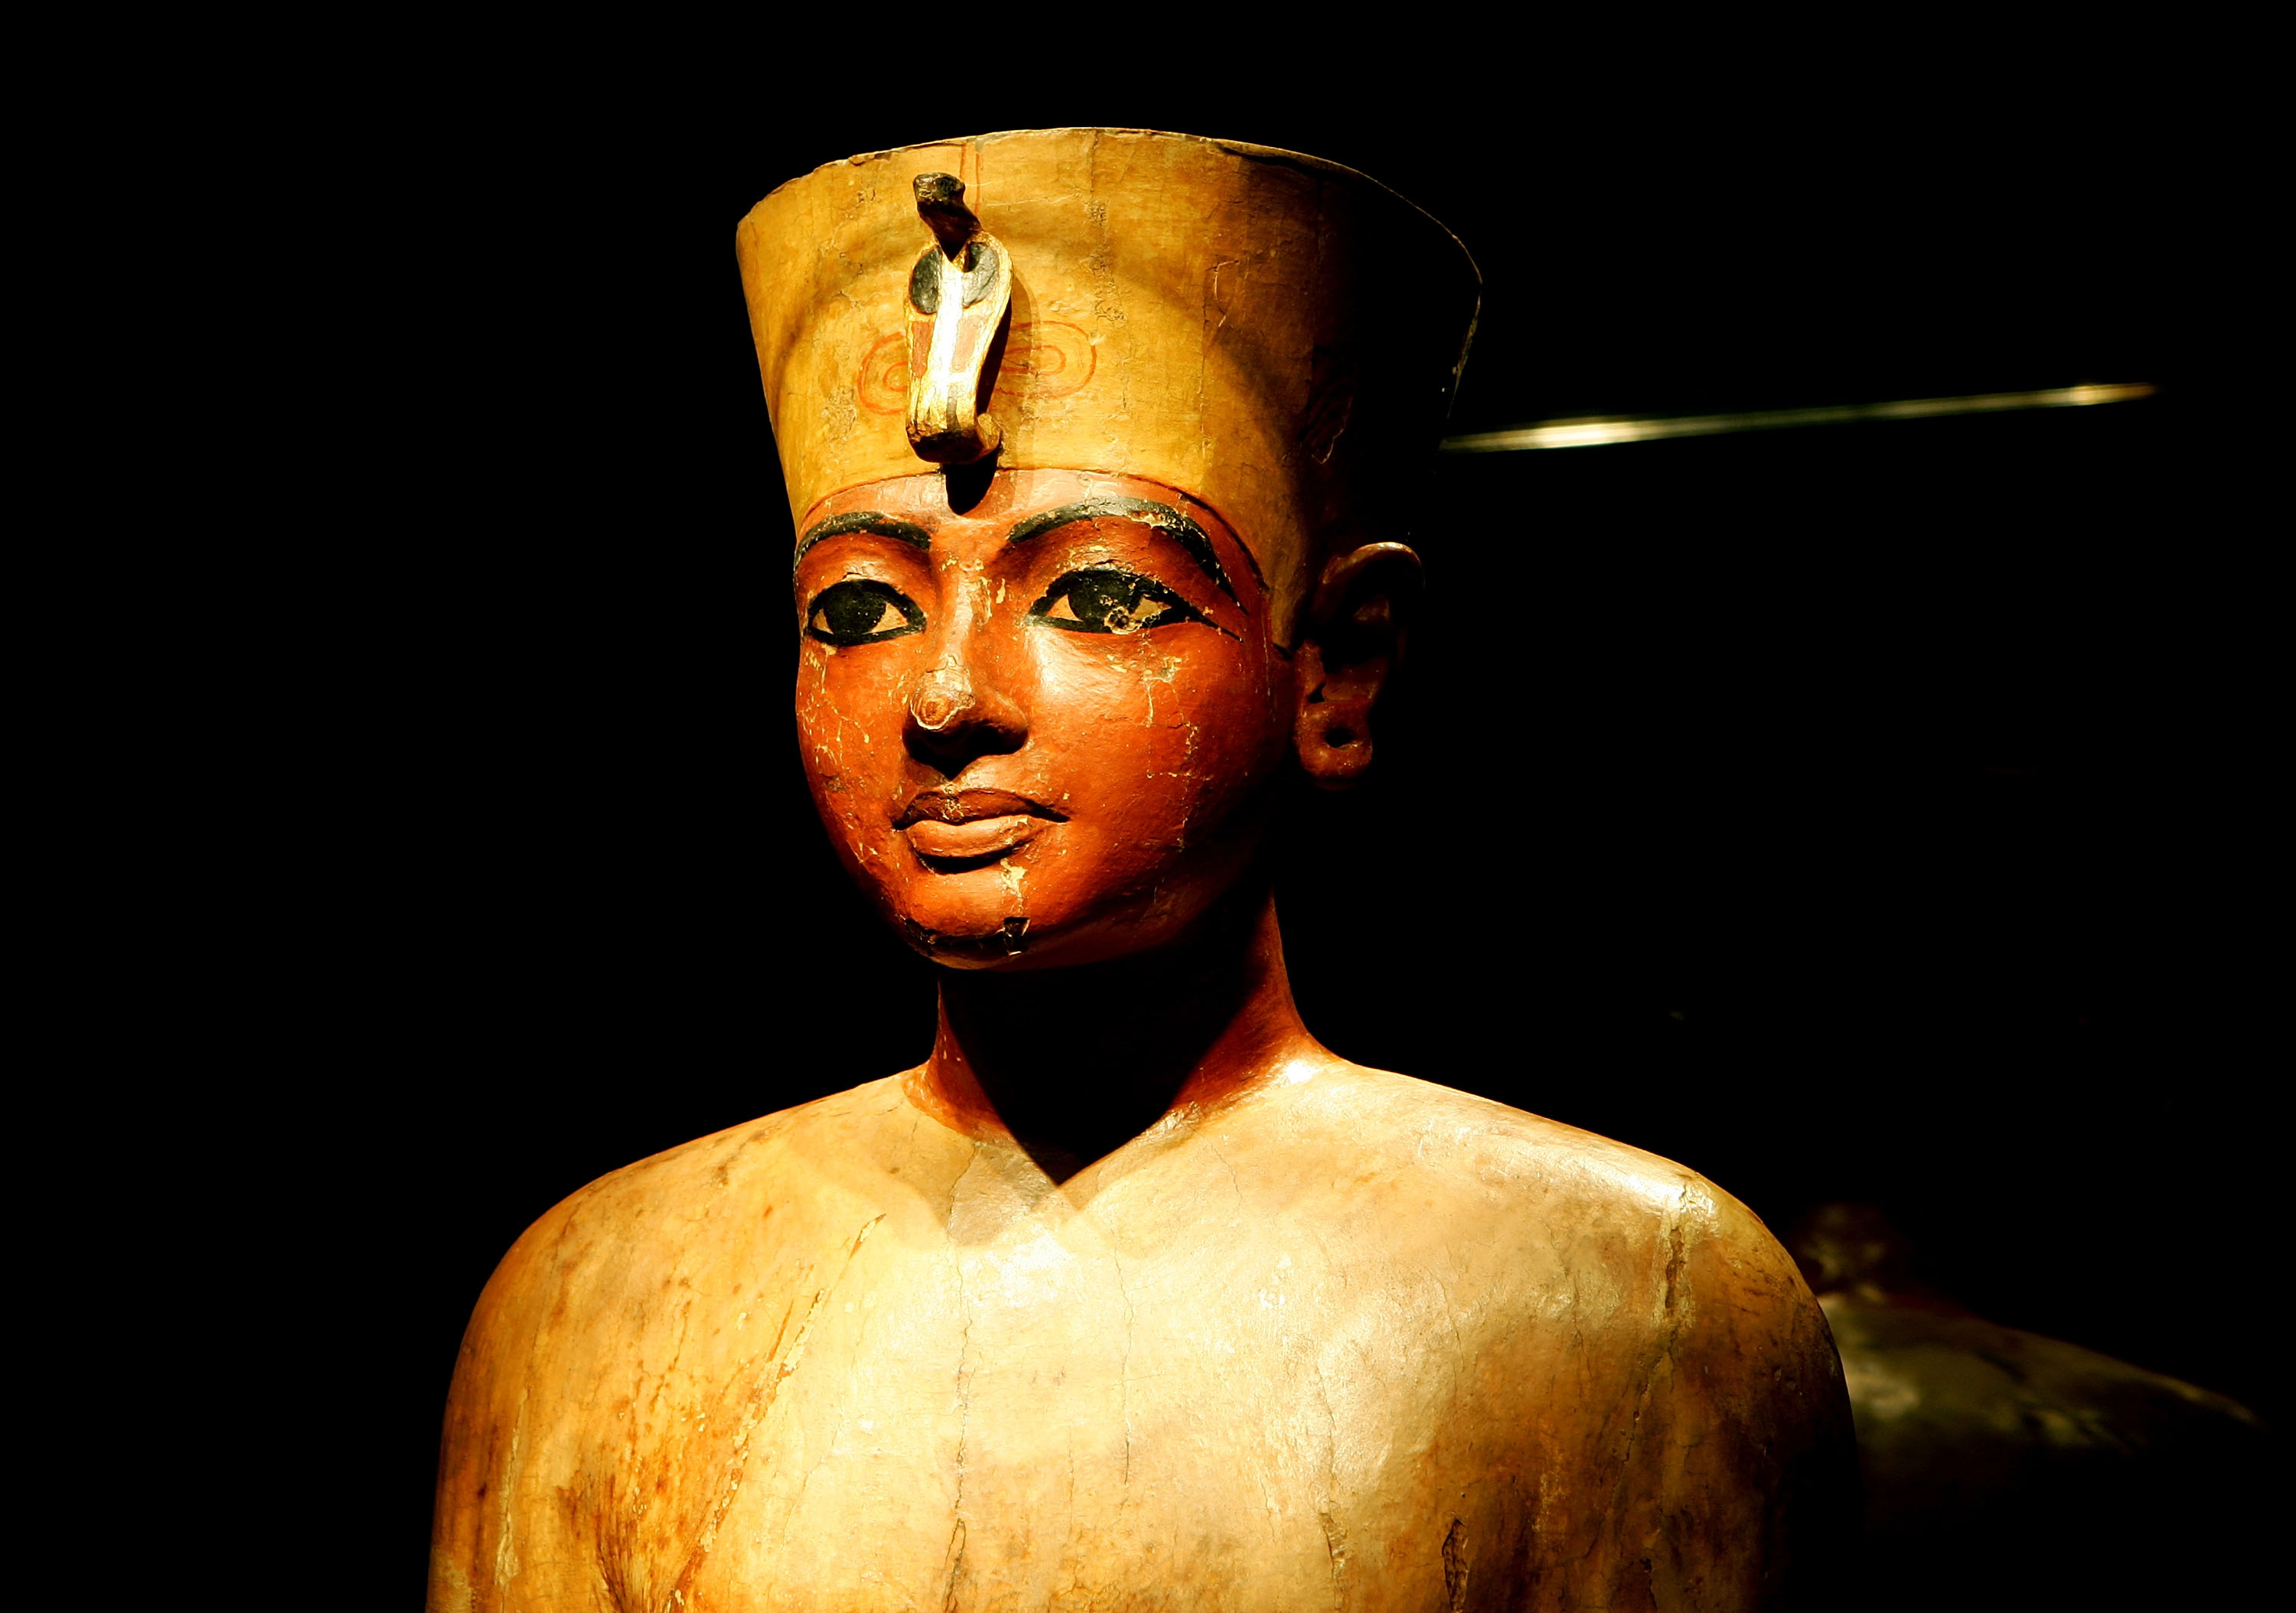 LOS ANGELES, CA - JUNE 15: Mannequin (bust of Tutankhamun) is on display during the "Tutankhamun And The Golden Age Of The Pharaohs" Exhibit Opening at the Los Angeles County Museum of Art (LACMA) on June 15, 2005 in Los Angeles, California. Carved of wood and then covered in gesso and painted, this bust of Tutankhamun portrays the young king much more as a youthful figure than a divine being. (Photo by Ethan Miller/Getty Images)